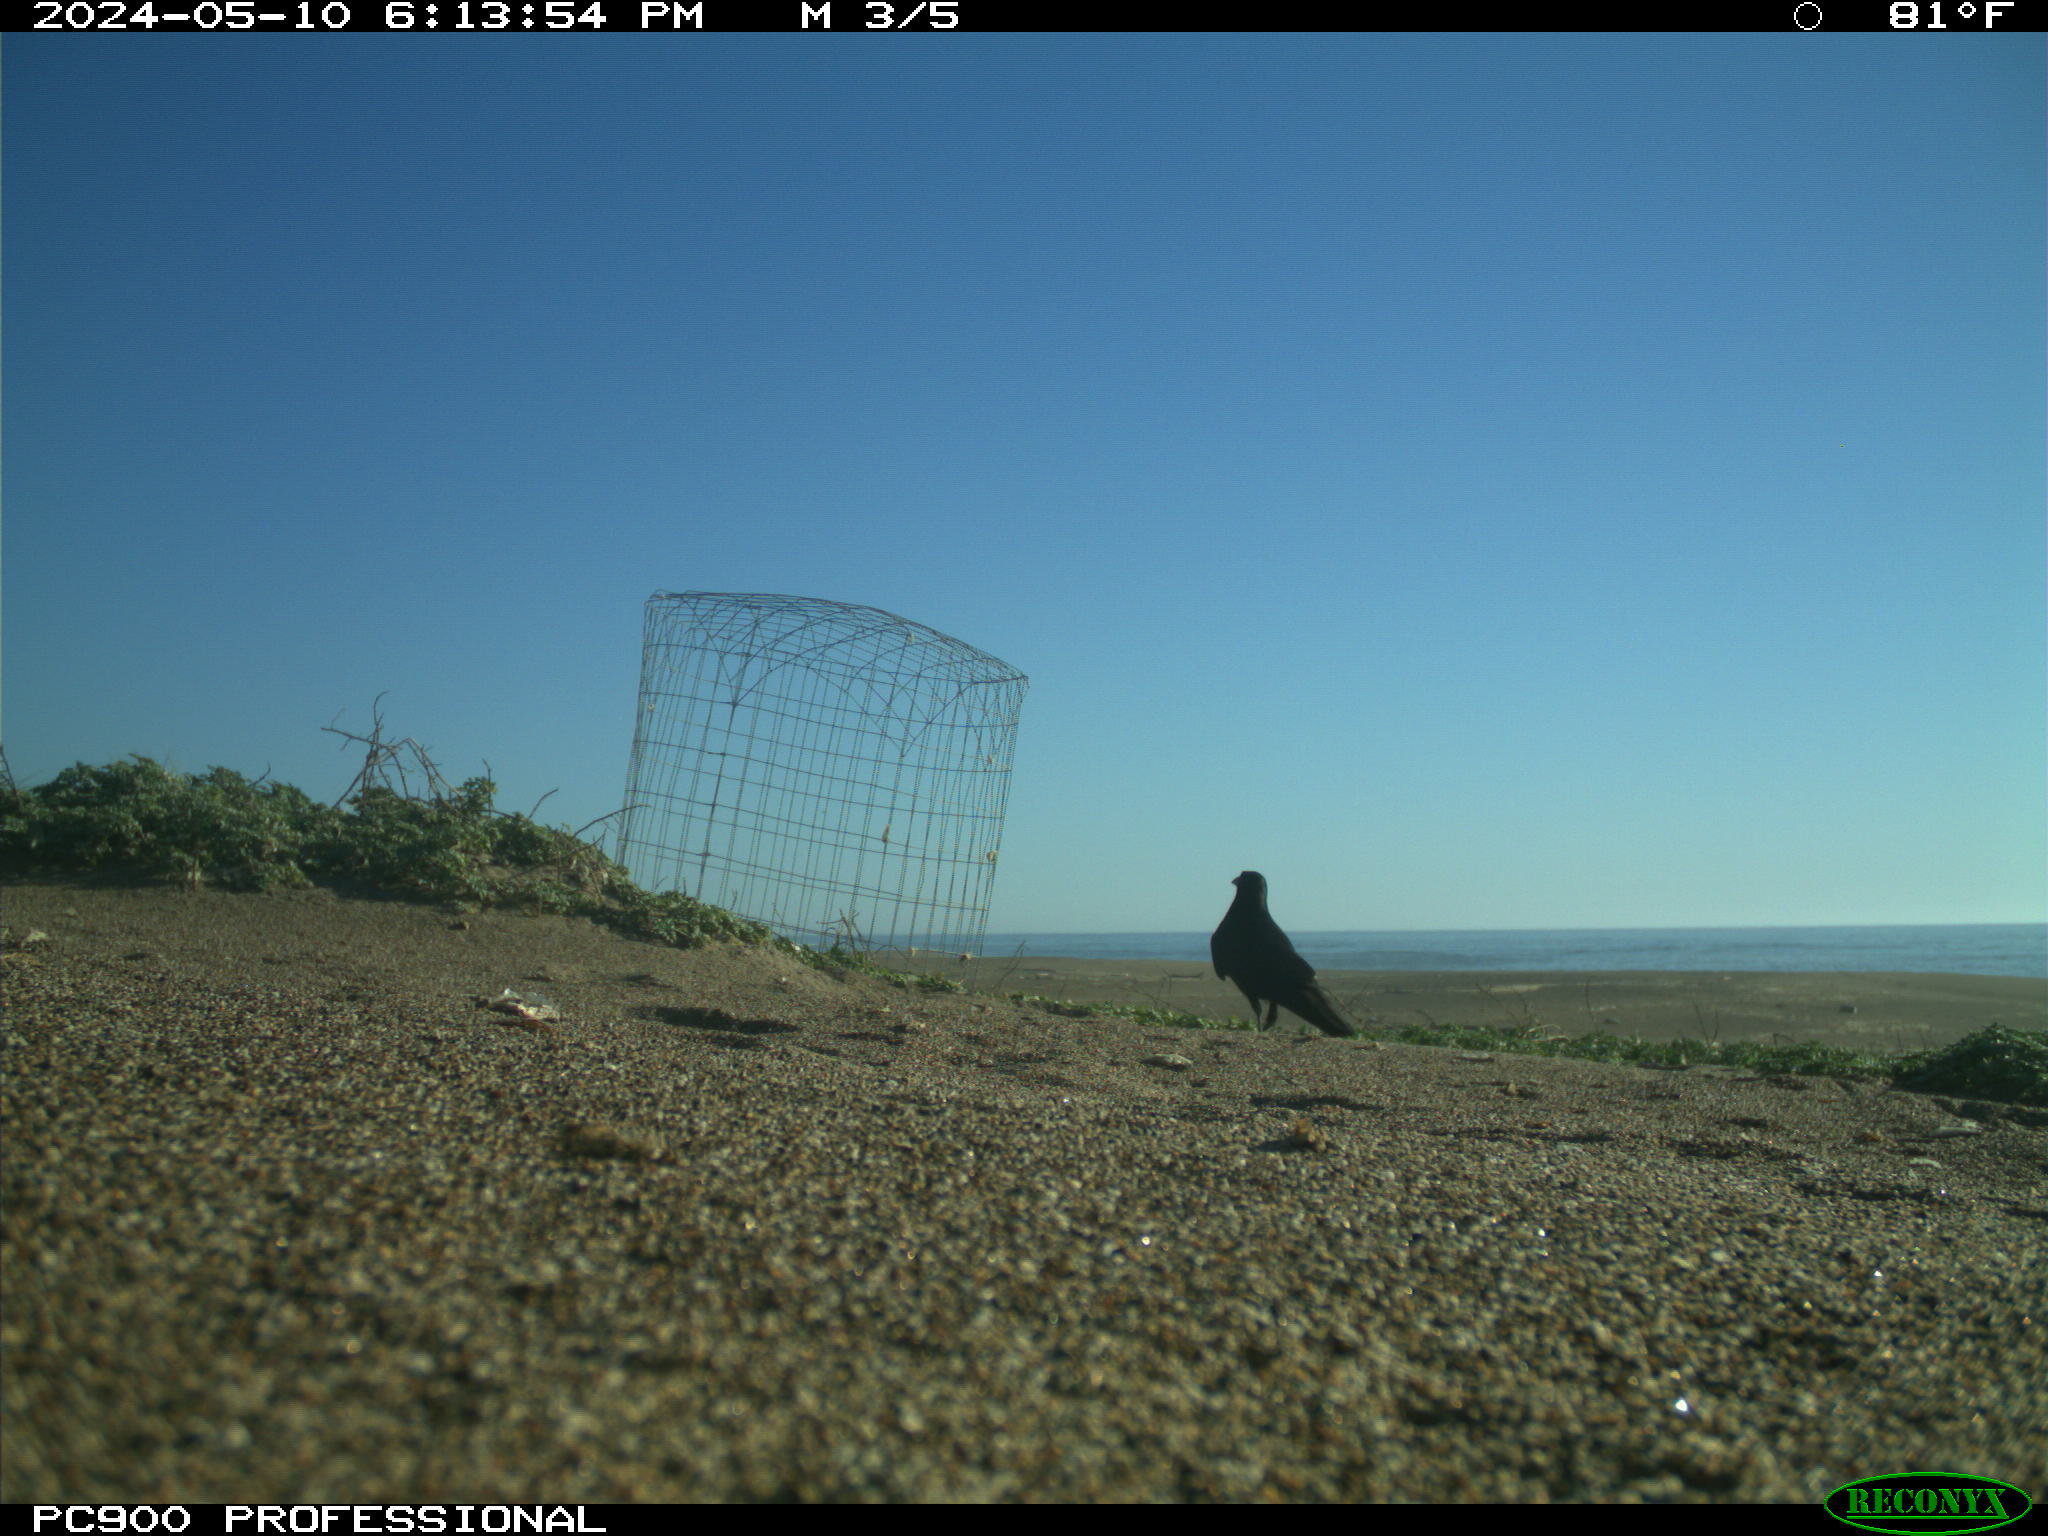 A black common raven standing adjacent to a small wire exclosure on a sandy beach.